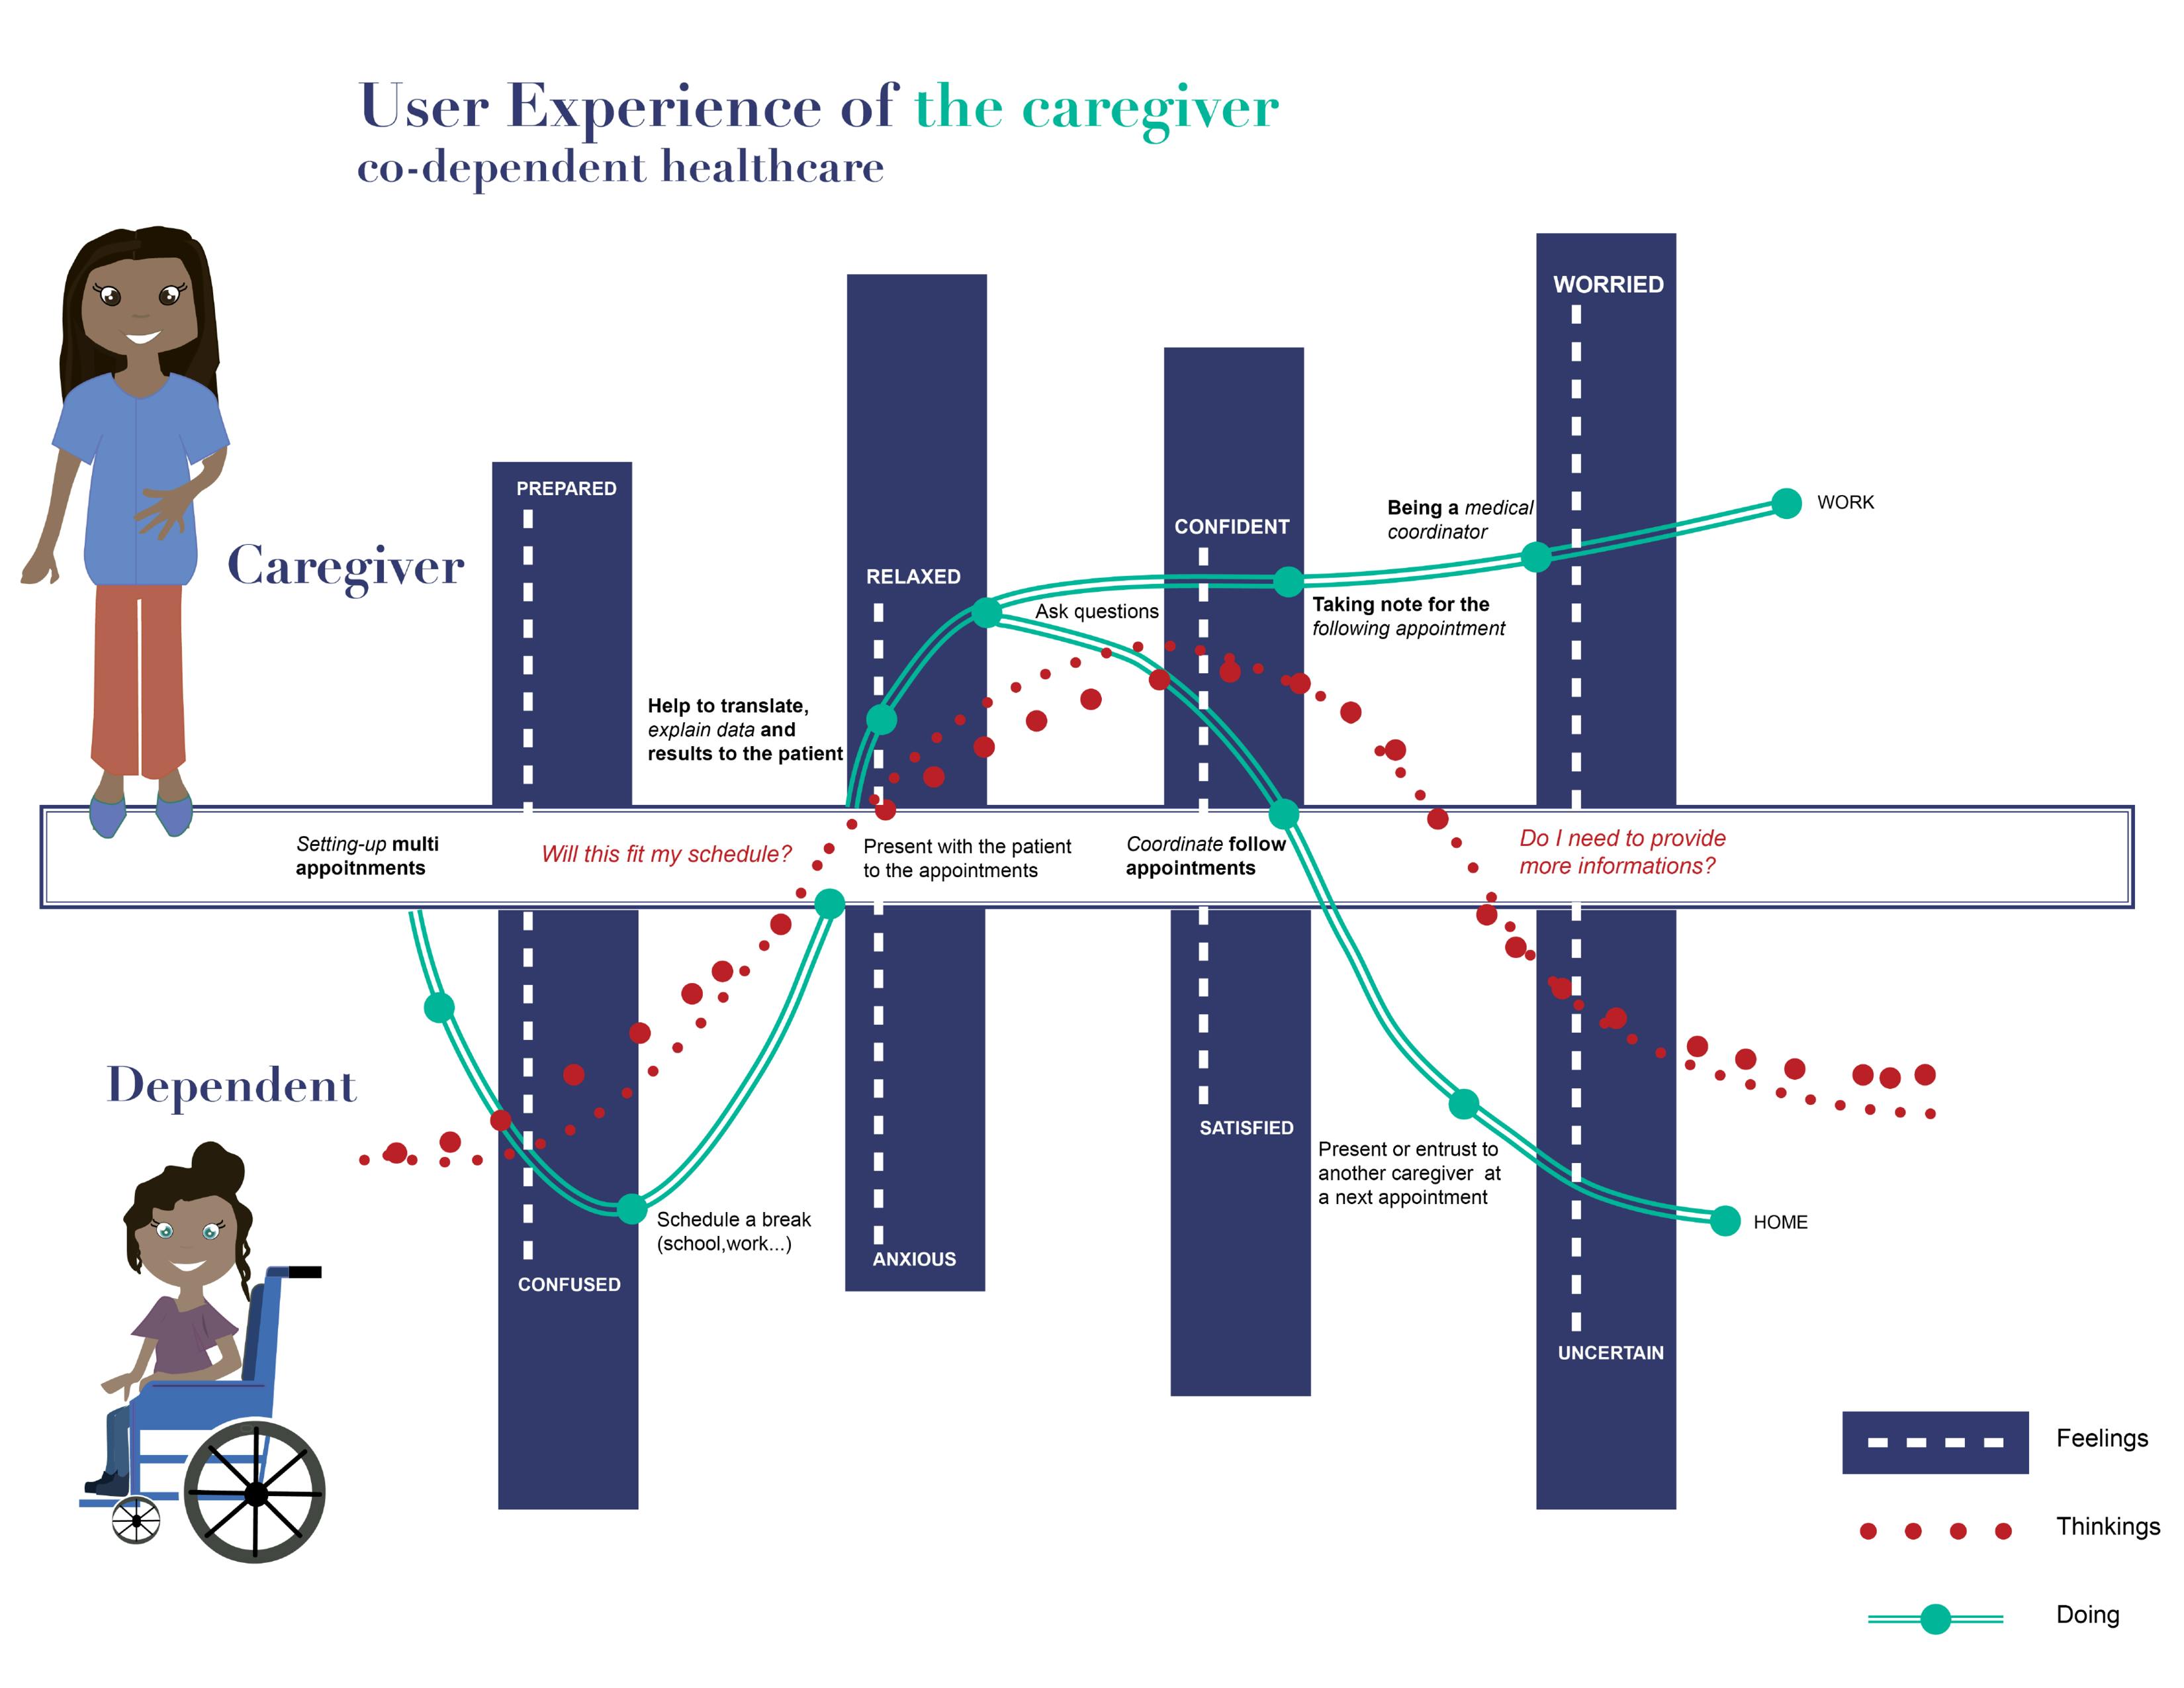 User experience map of the caregiver setting up multiple appoints with their dependent and care providers, visualizing their feelings, thinkings, and doings throughout the process.